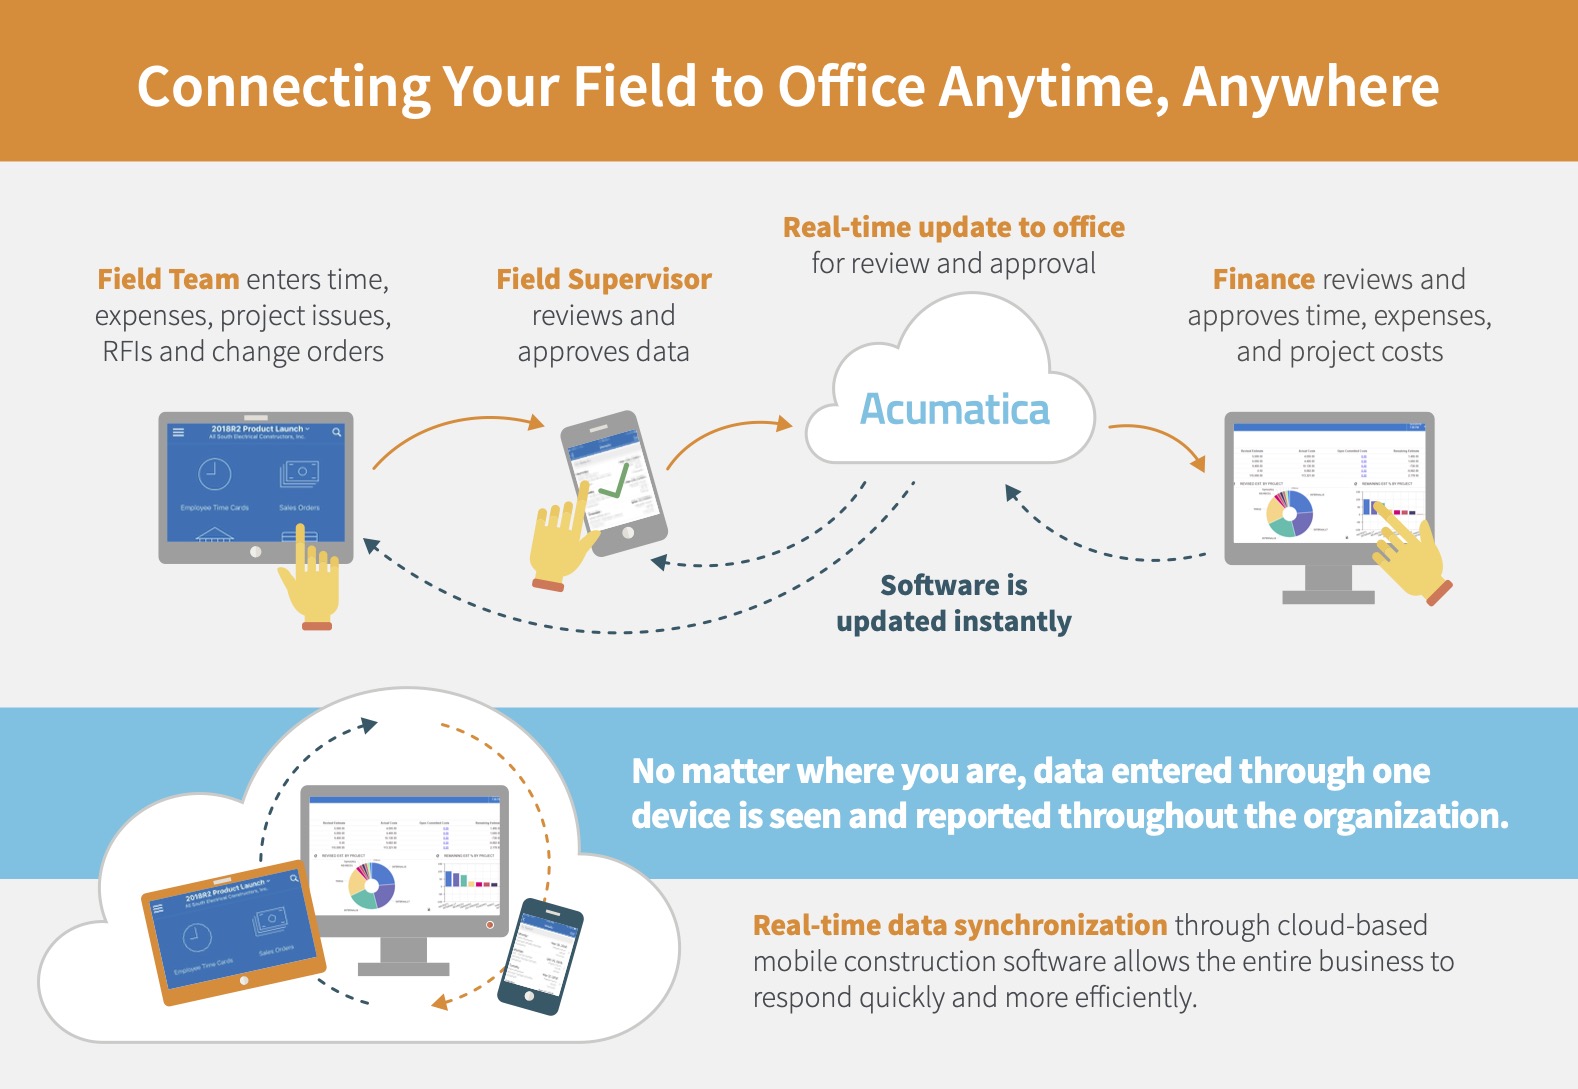 Connect Your Field to Your Office Anytime, Anywhere with Acumatica Cloud ERP